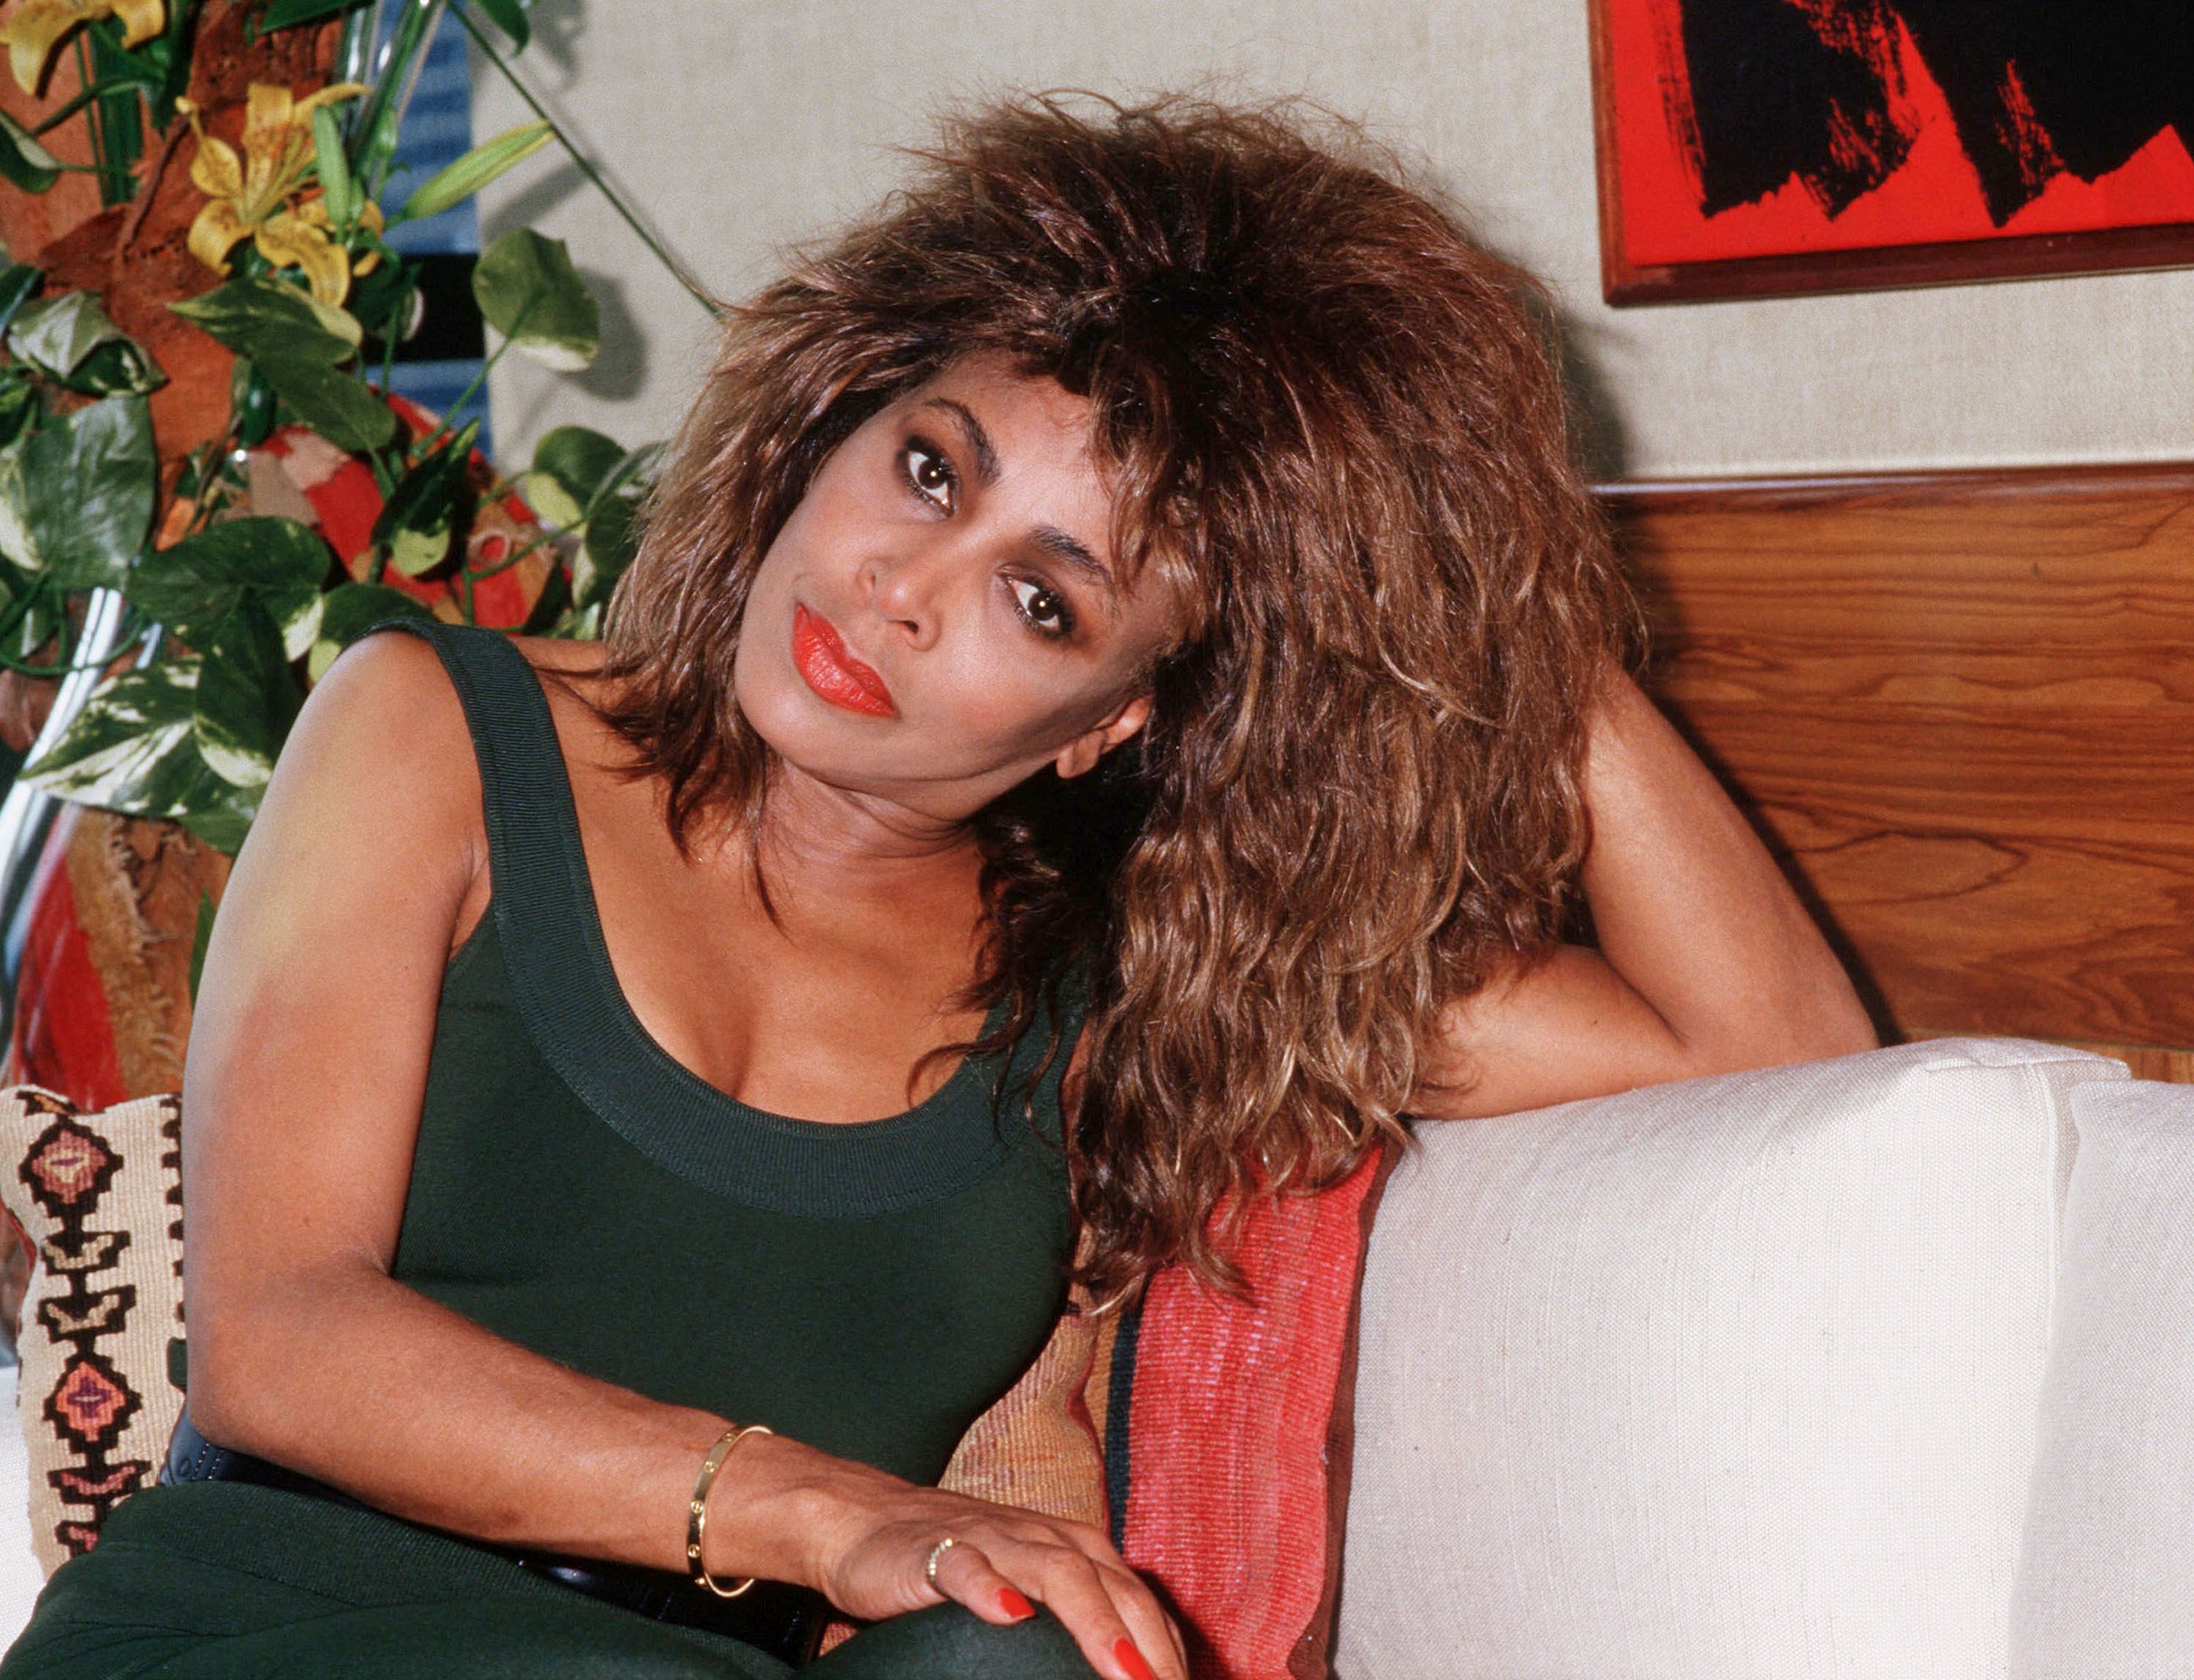 Tina Turner in Rio de Janeiro, Brazil, in 1988 | Source: Getty Images